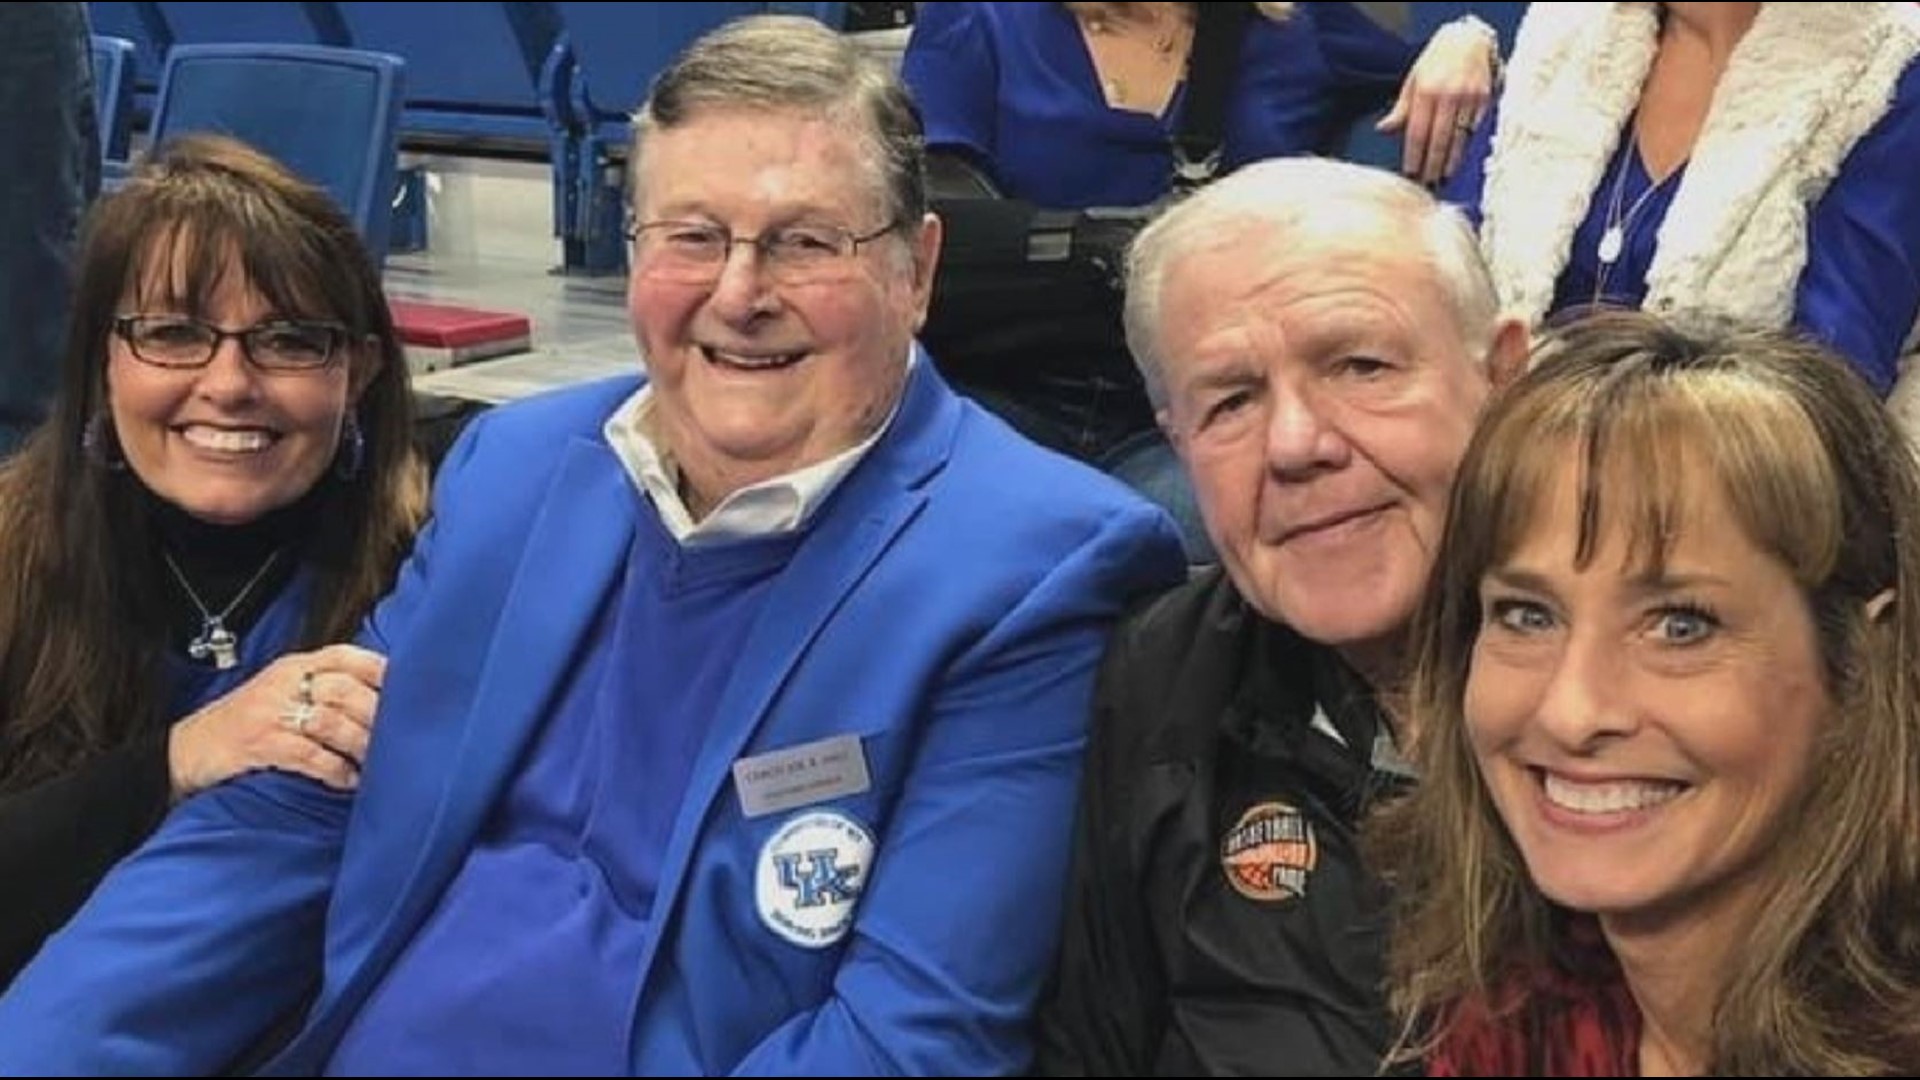 Crum discusses his longtime friend's impact on the University of Kentucky and college basketball after he passed away on Jan. 15.